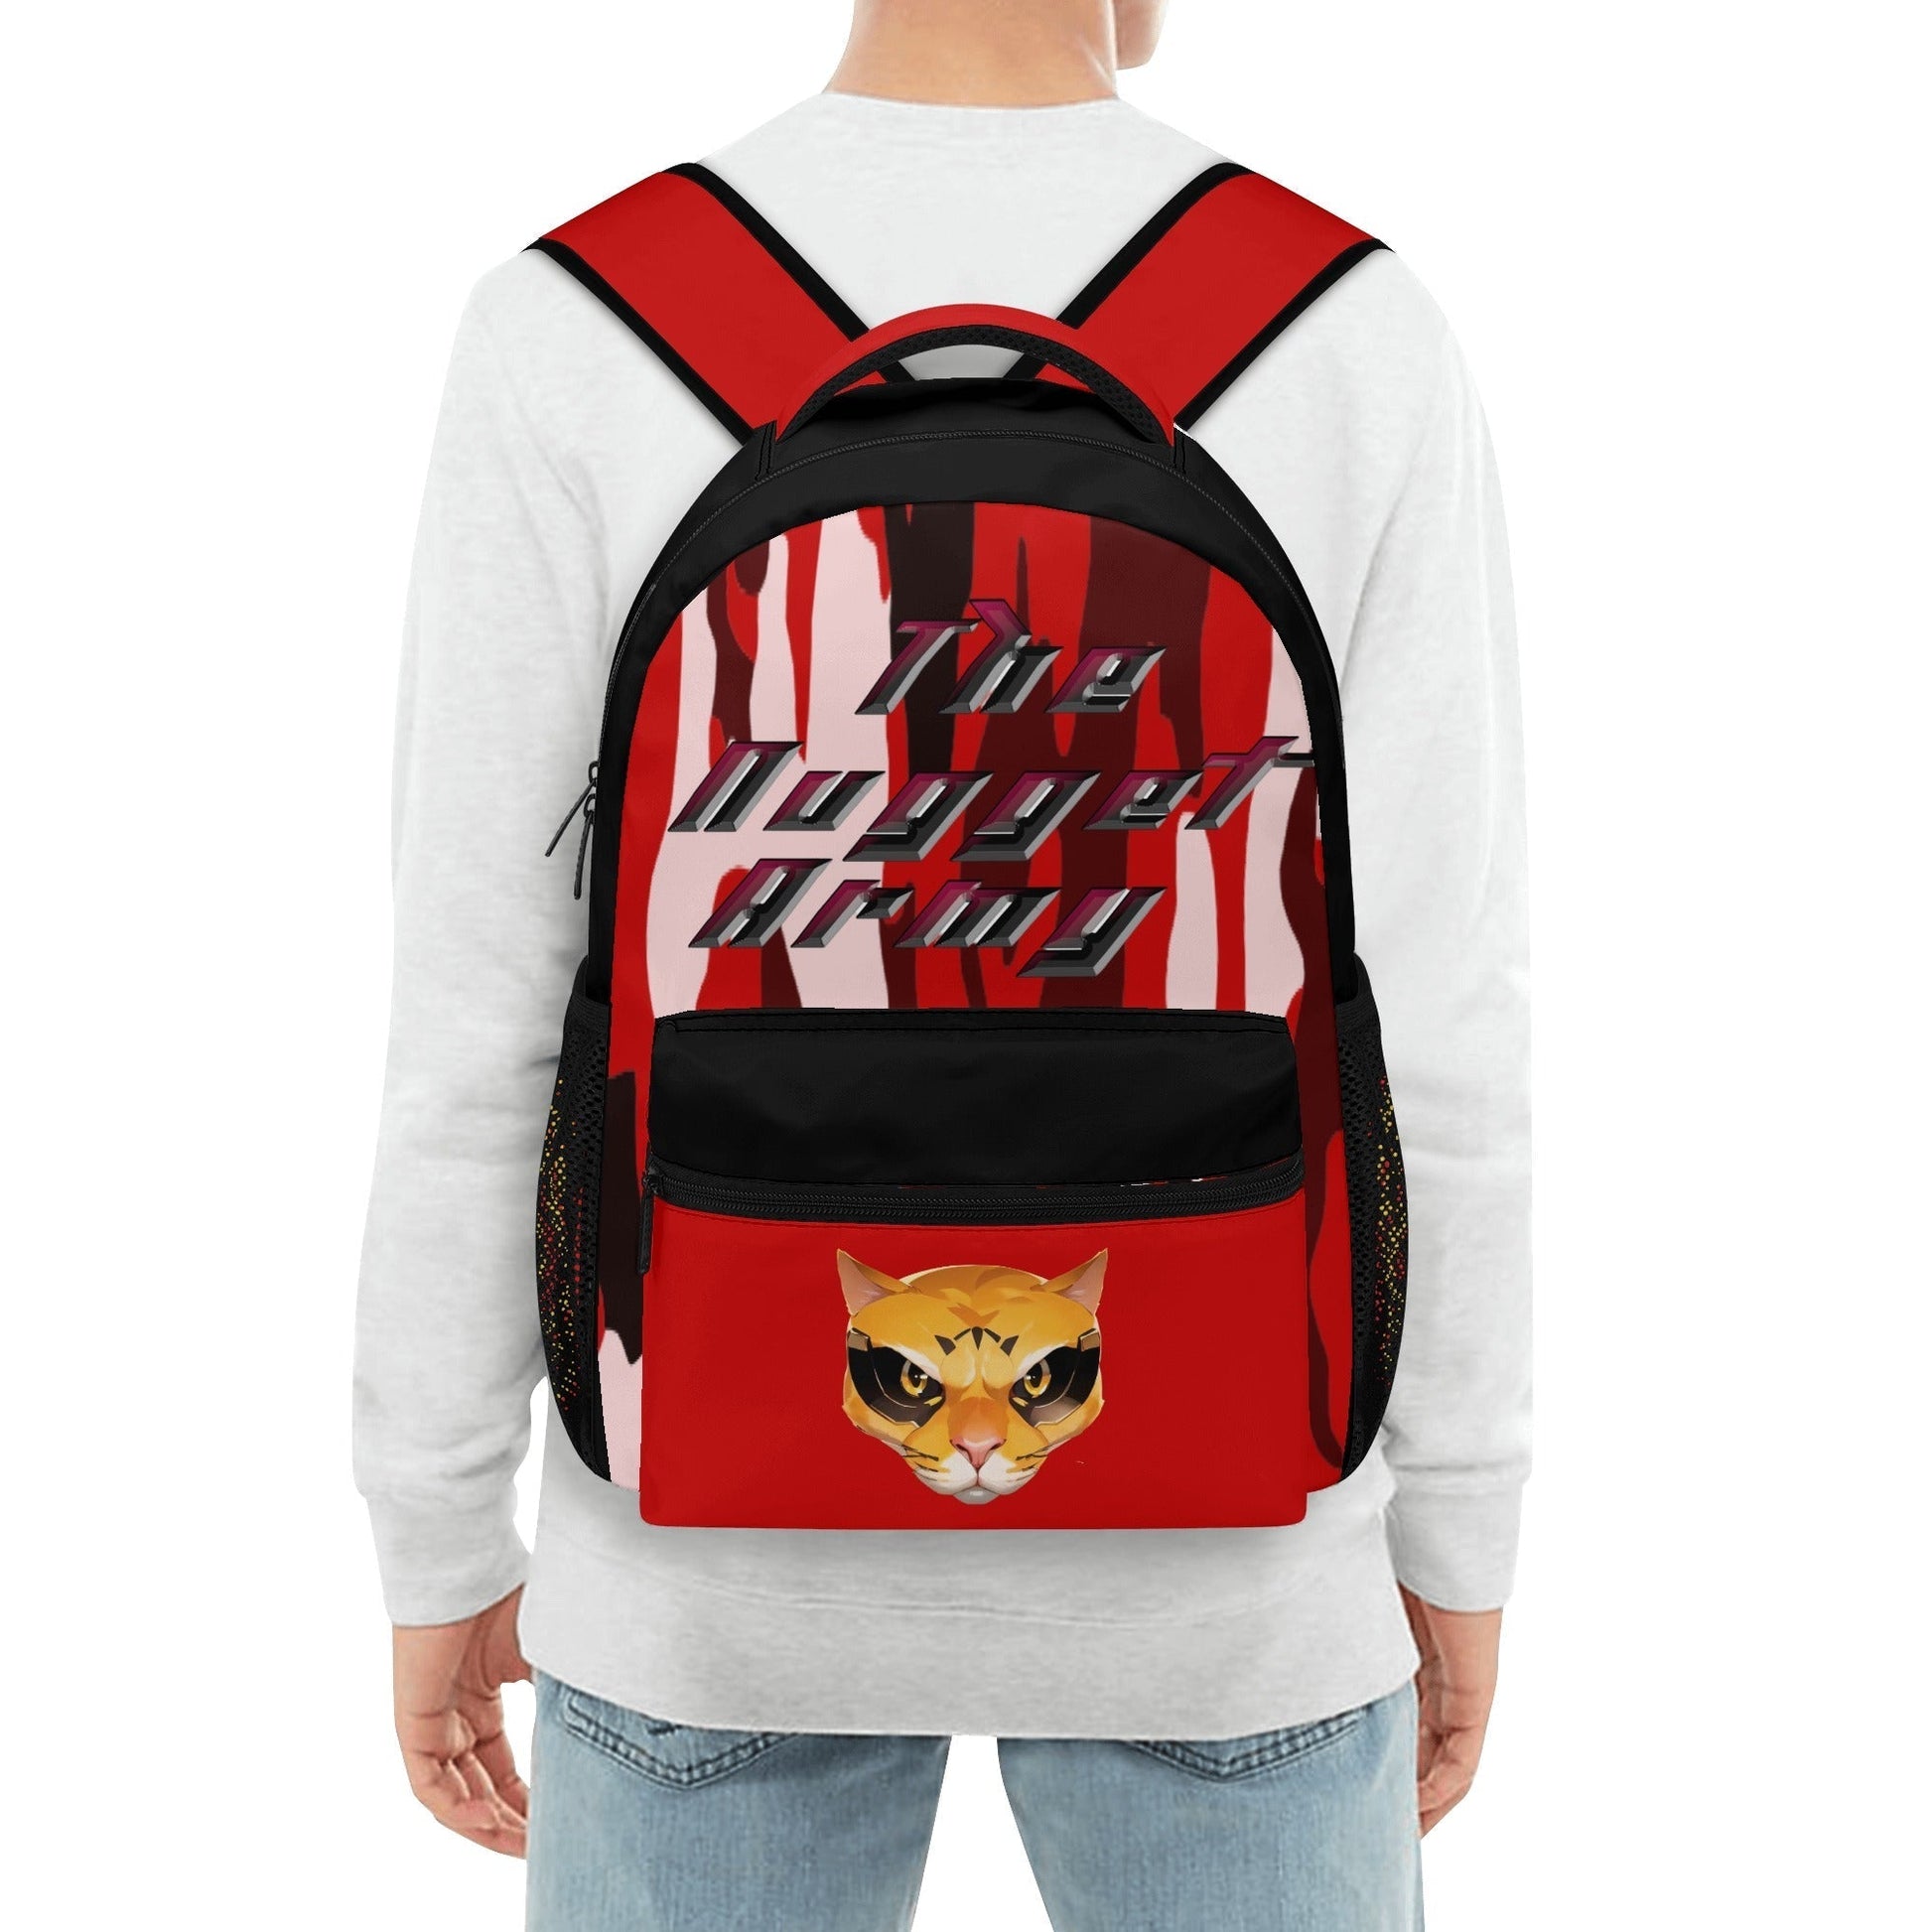 Stand out  with the  Nugget Army Casual Style School Bakcpack  available at Hey Nugget. Grab yours today!